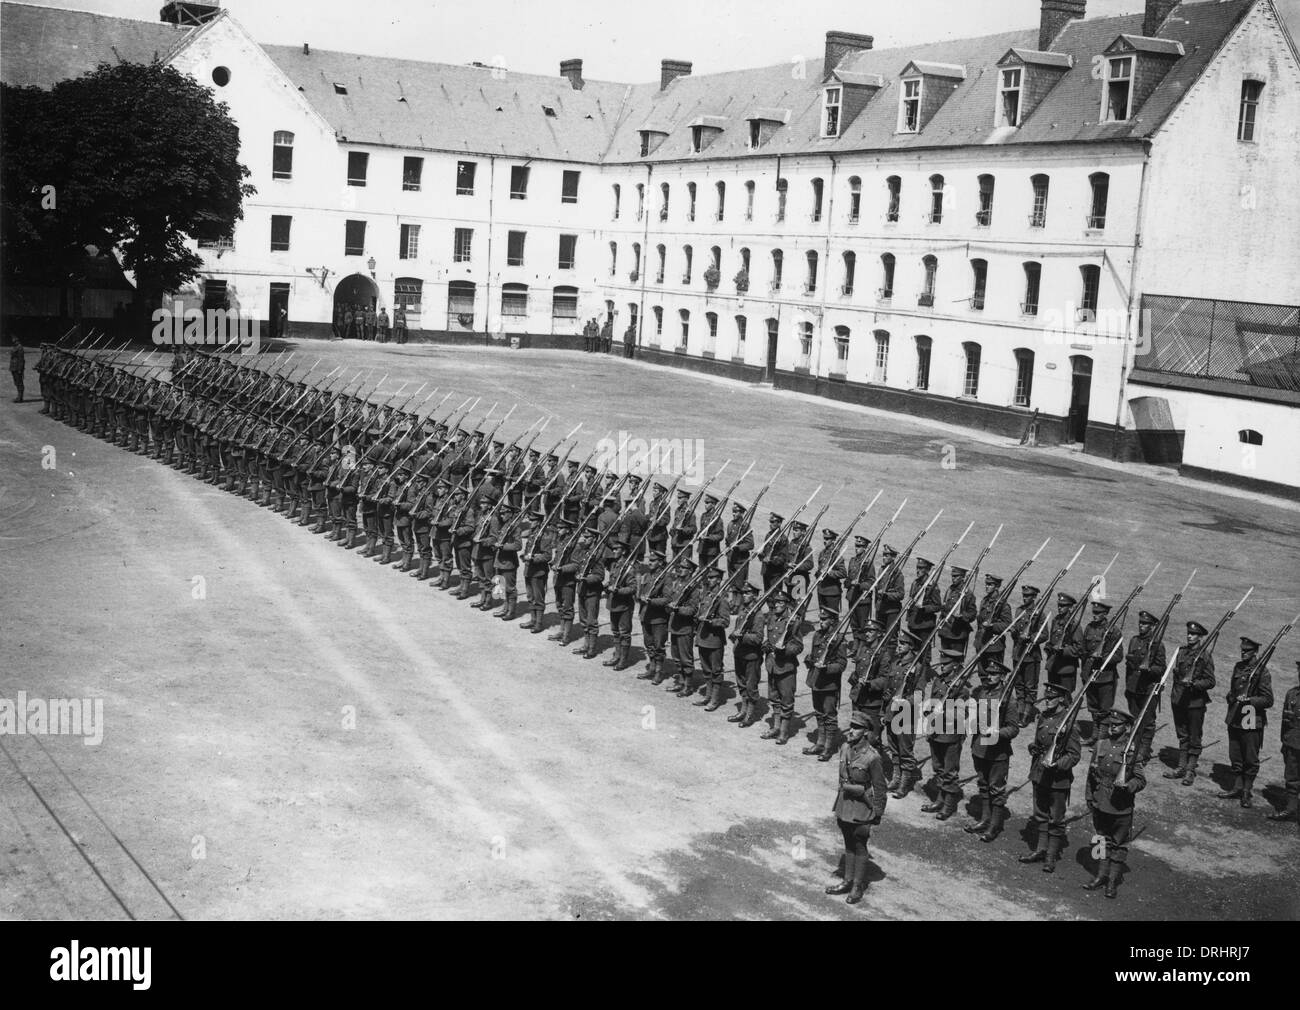 Guard of Honour, Ecole Militaire, Montreuil, France, WW1 Stock Photo